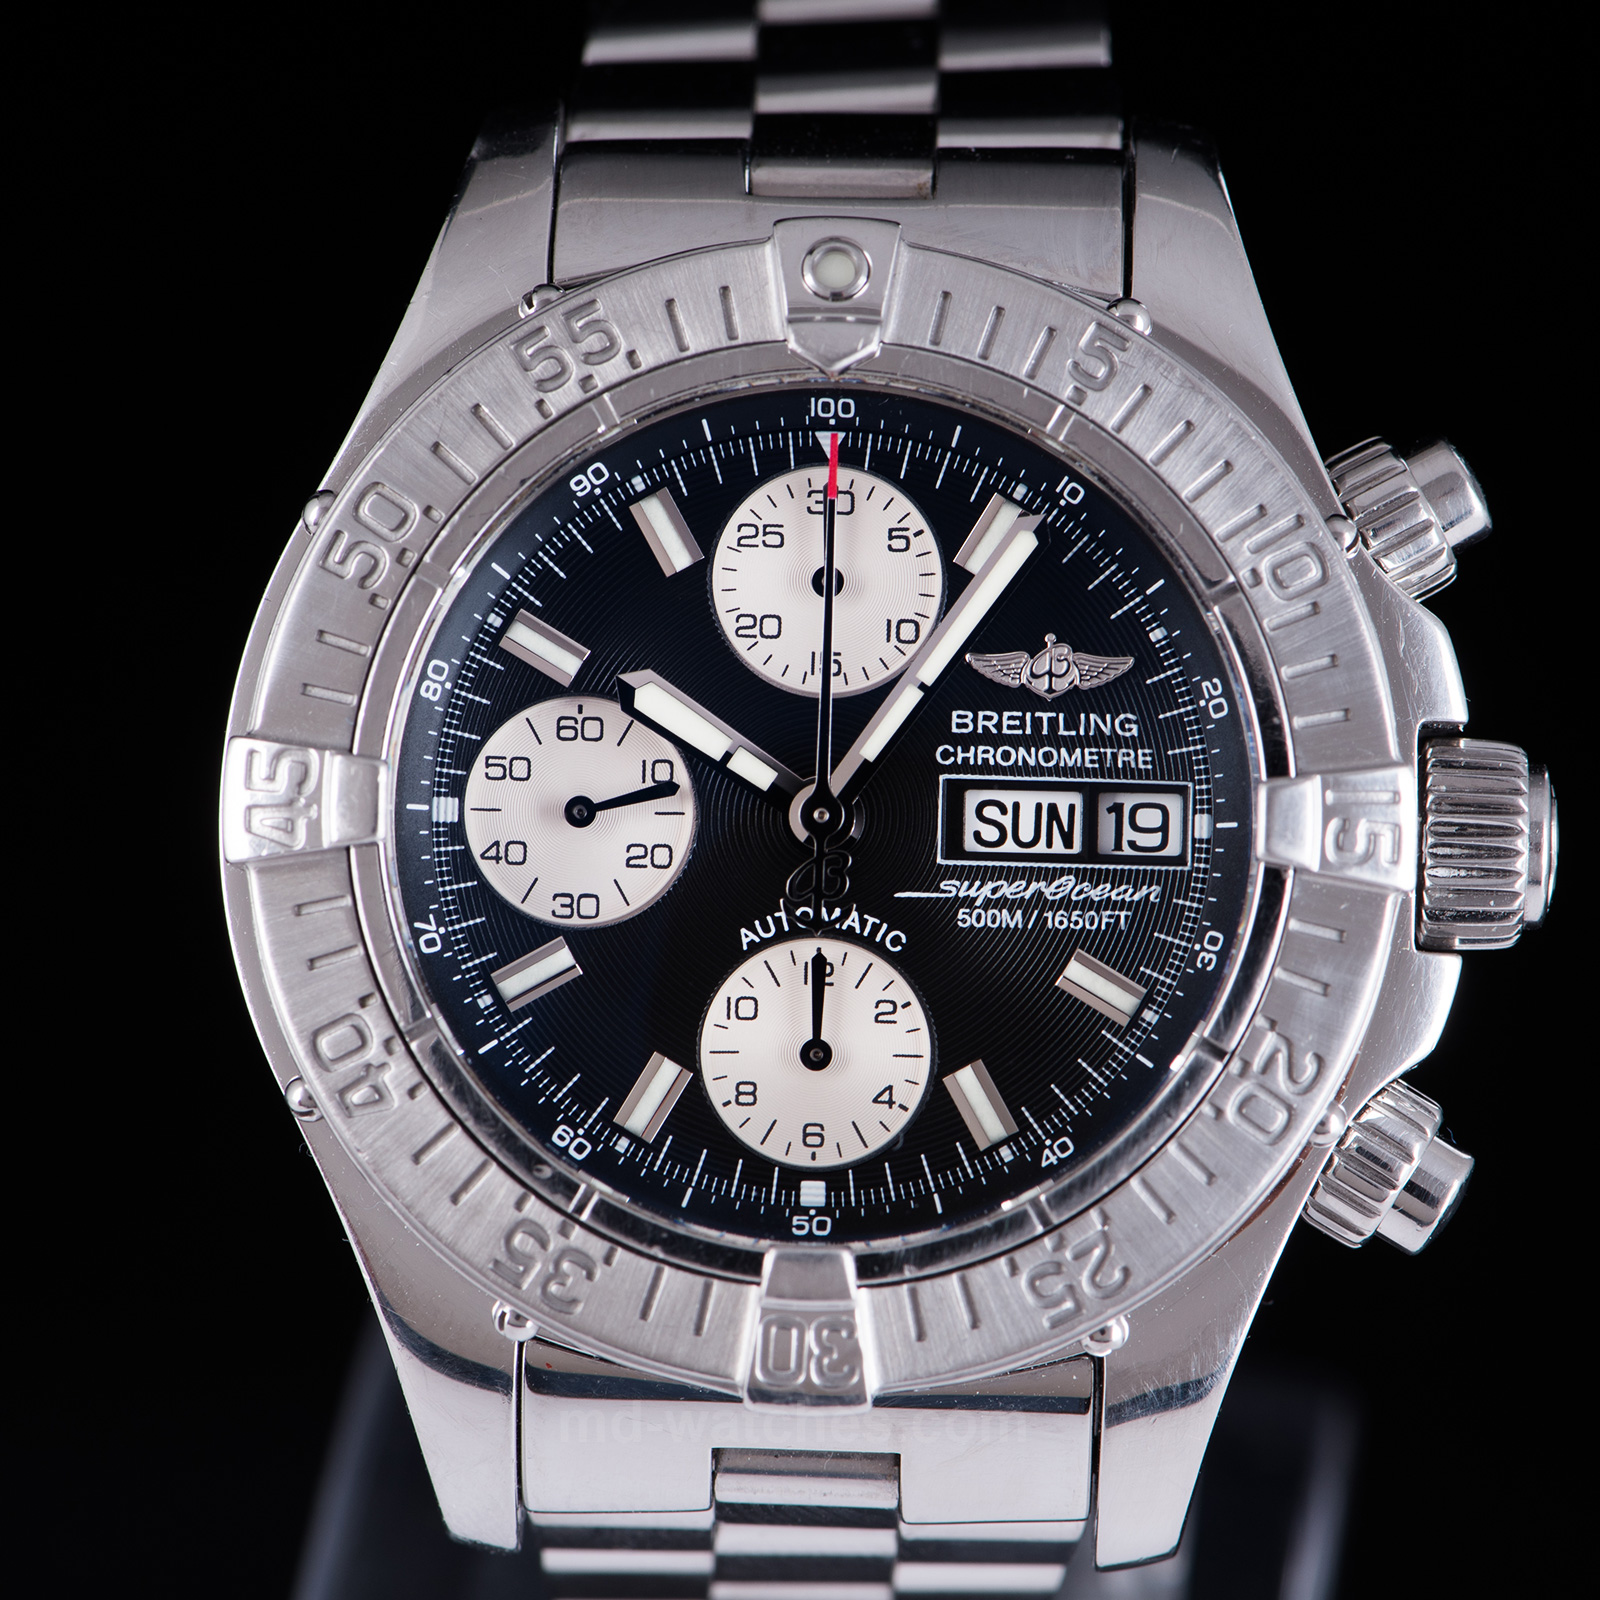 The 42 mm replica Breitling Superocean watches have black dials.